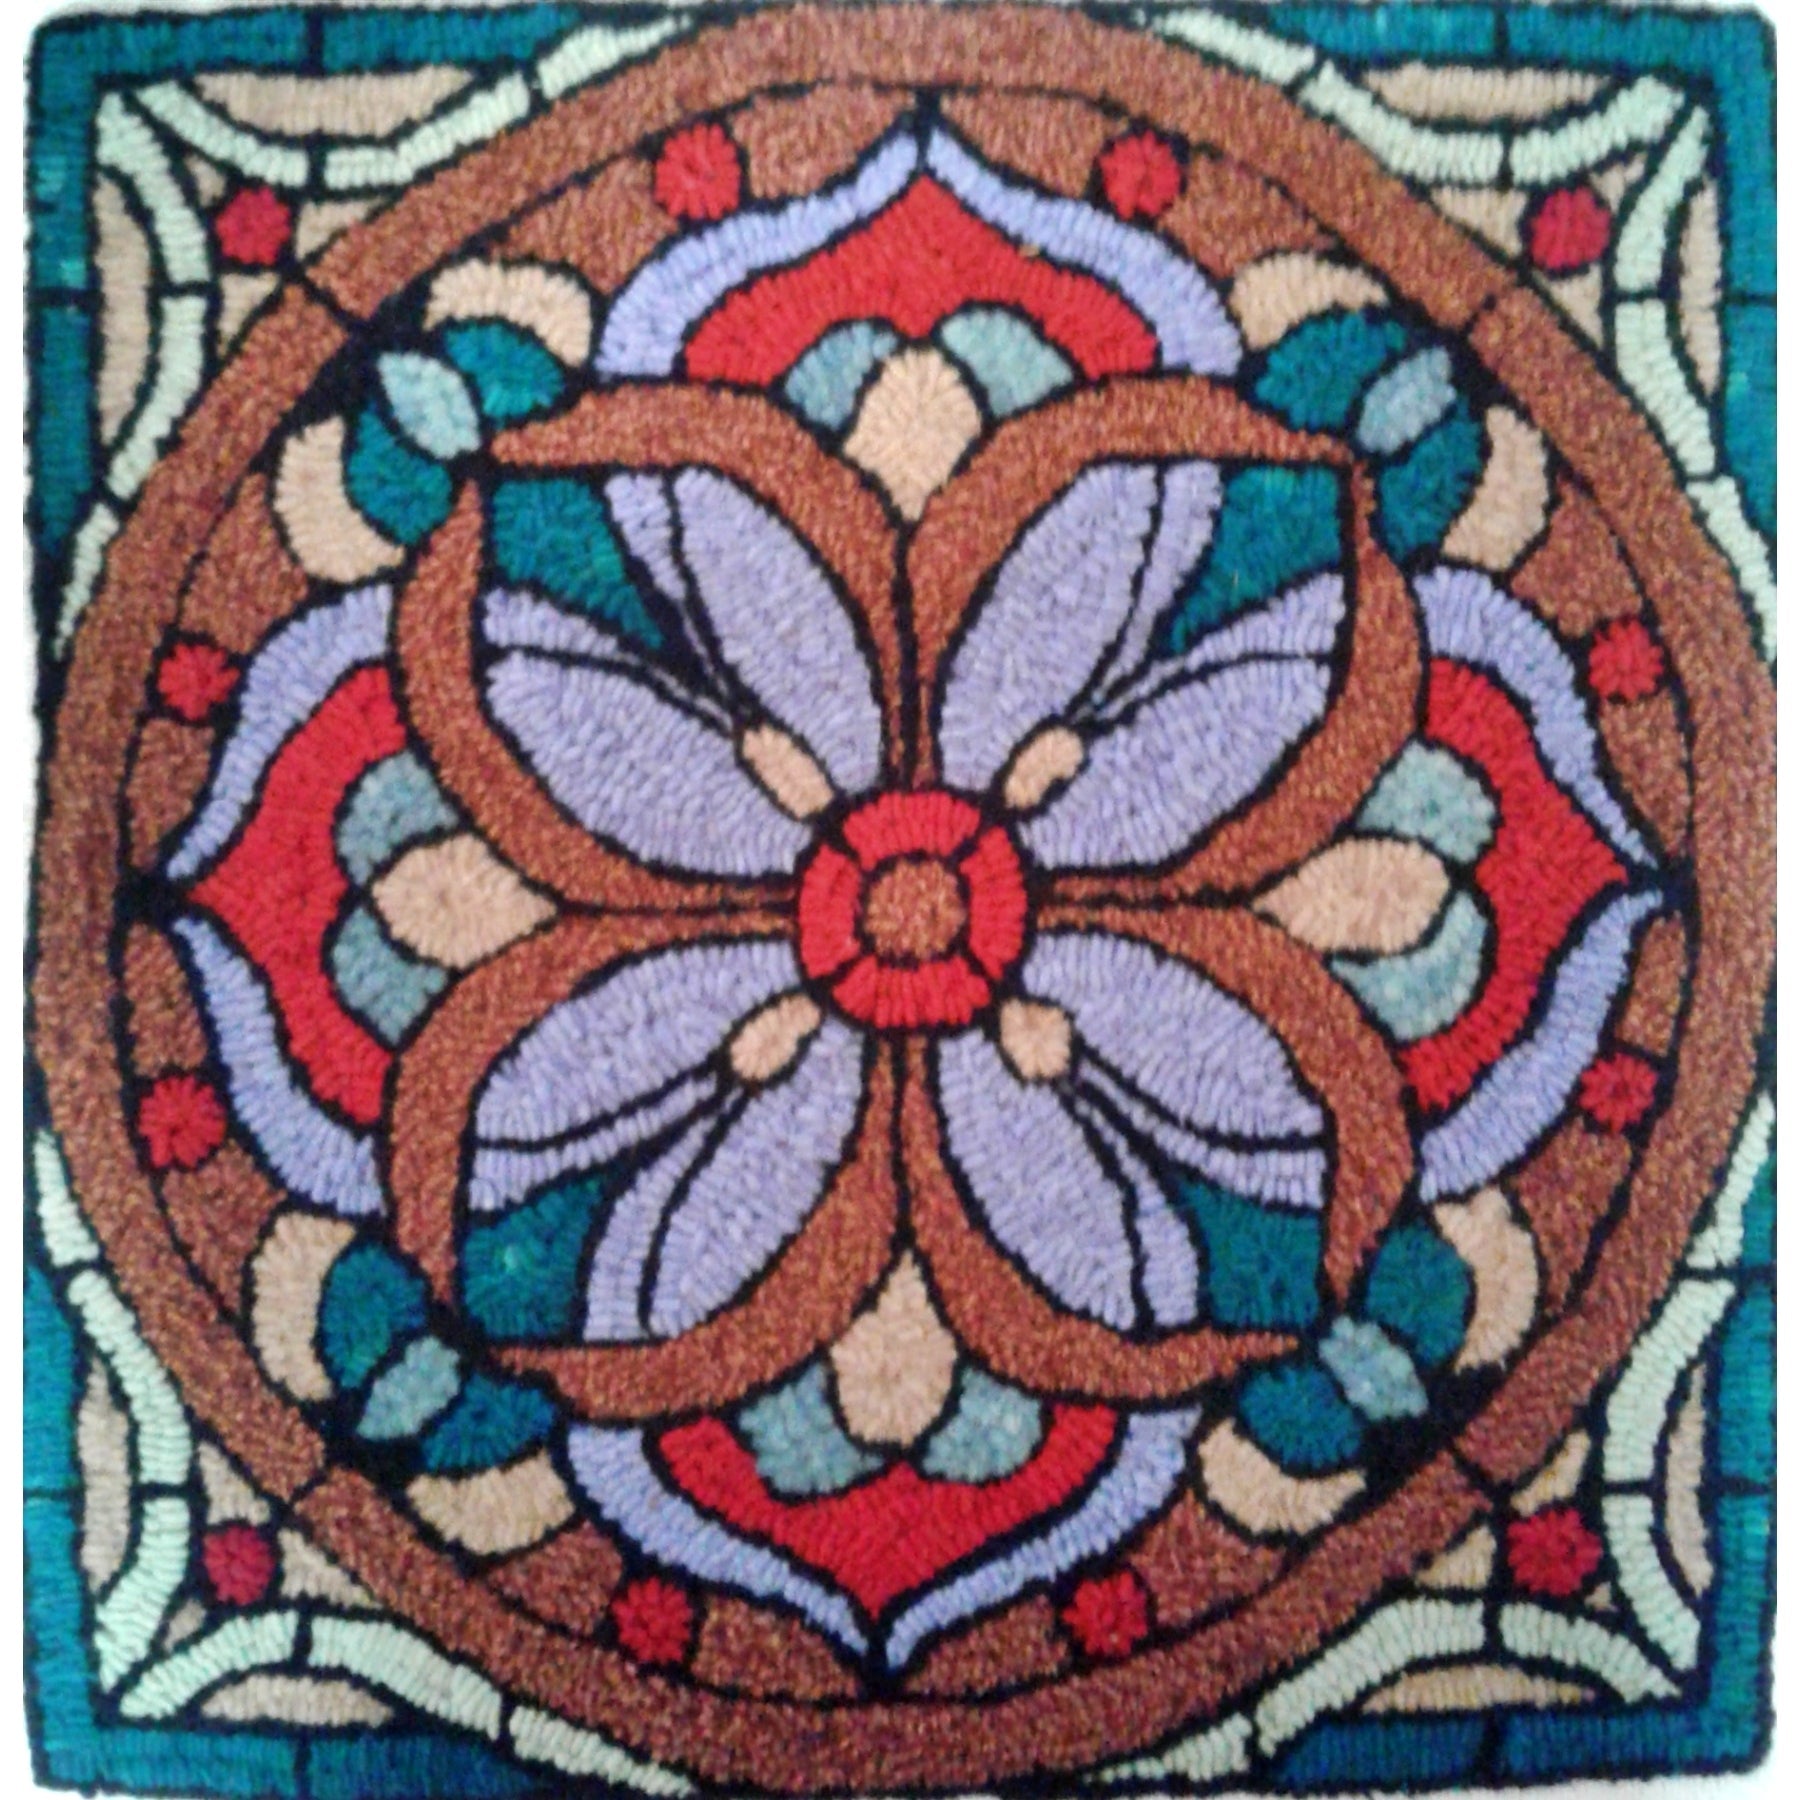 Stained Glass Mosaic, rug hooked by Judy Nedrow